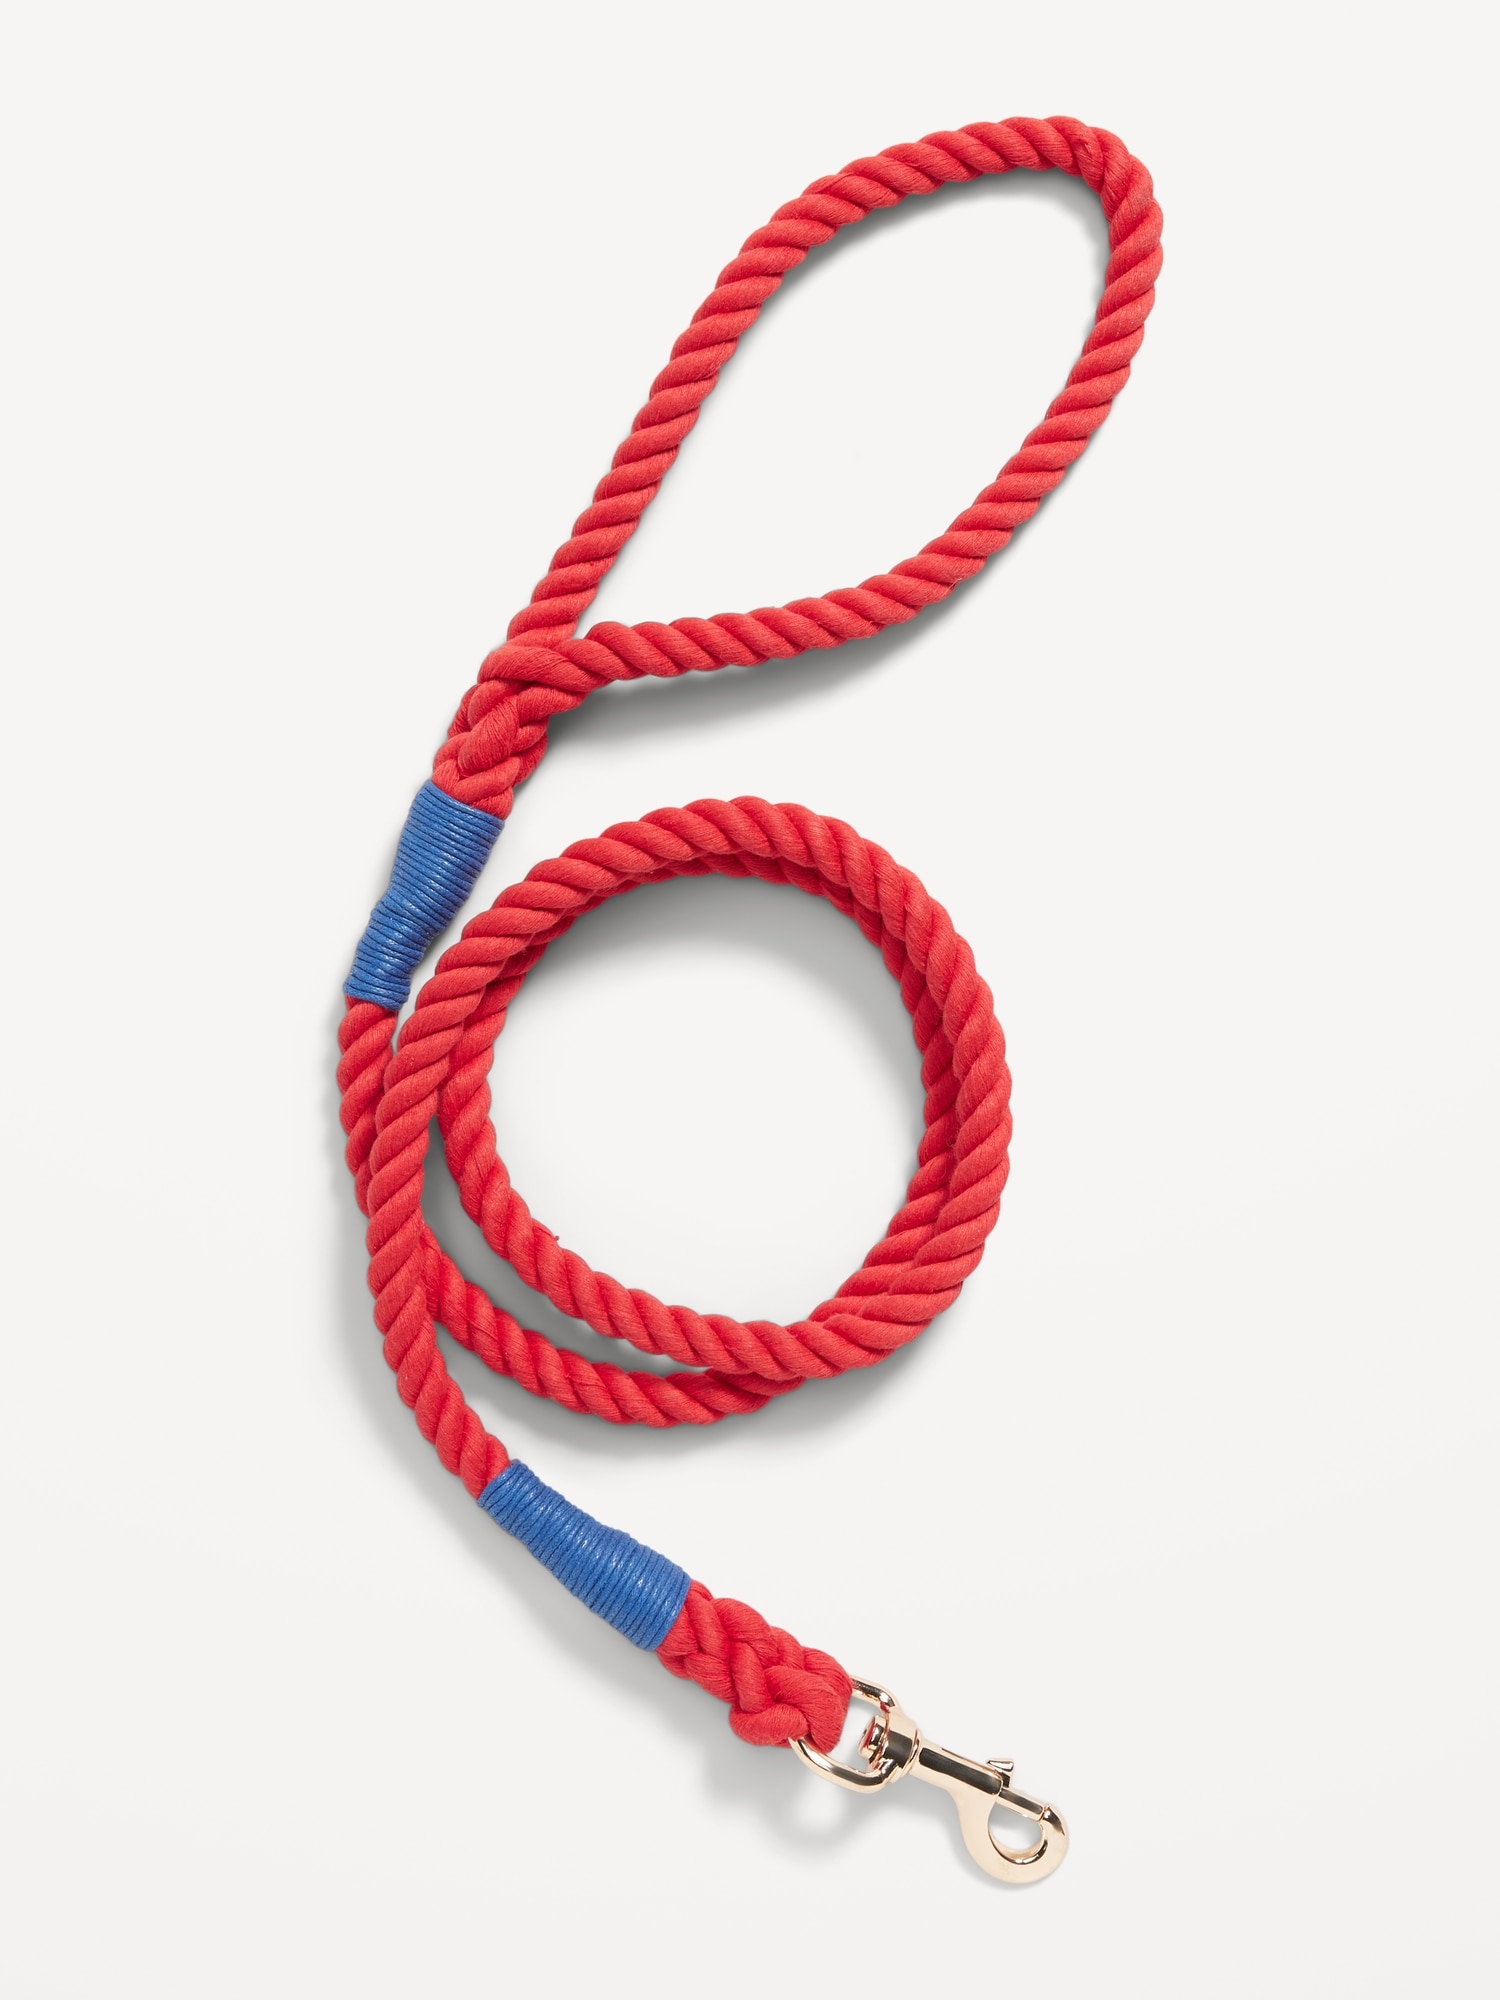 Old Navy Braided Rope Leash for Pets red. 1